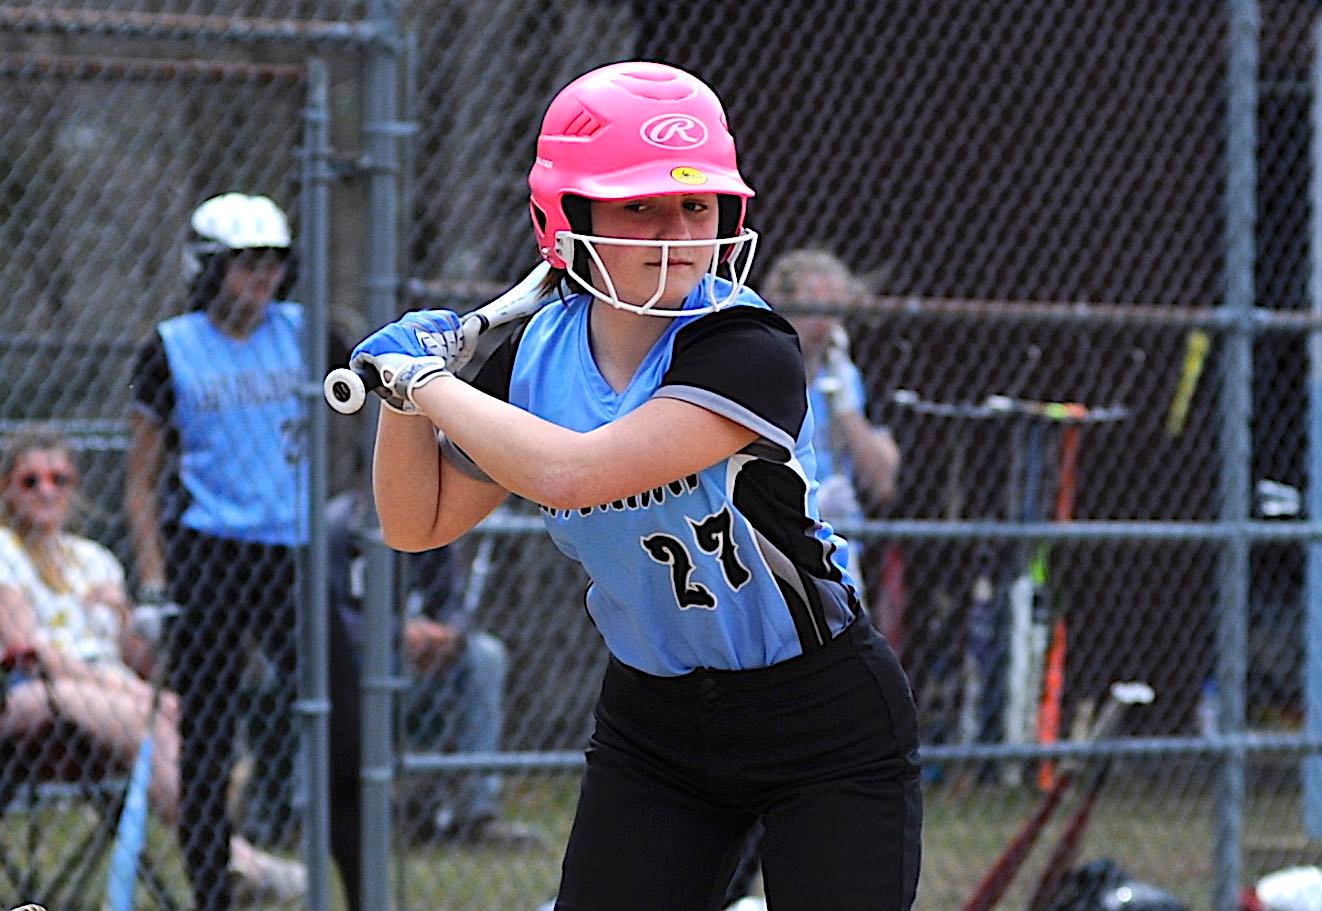 Annabelle Rutledge of the Lady Bulldogs strikes a pose with her hot pink battling helmet.